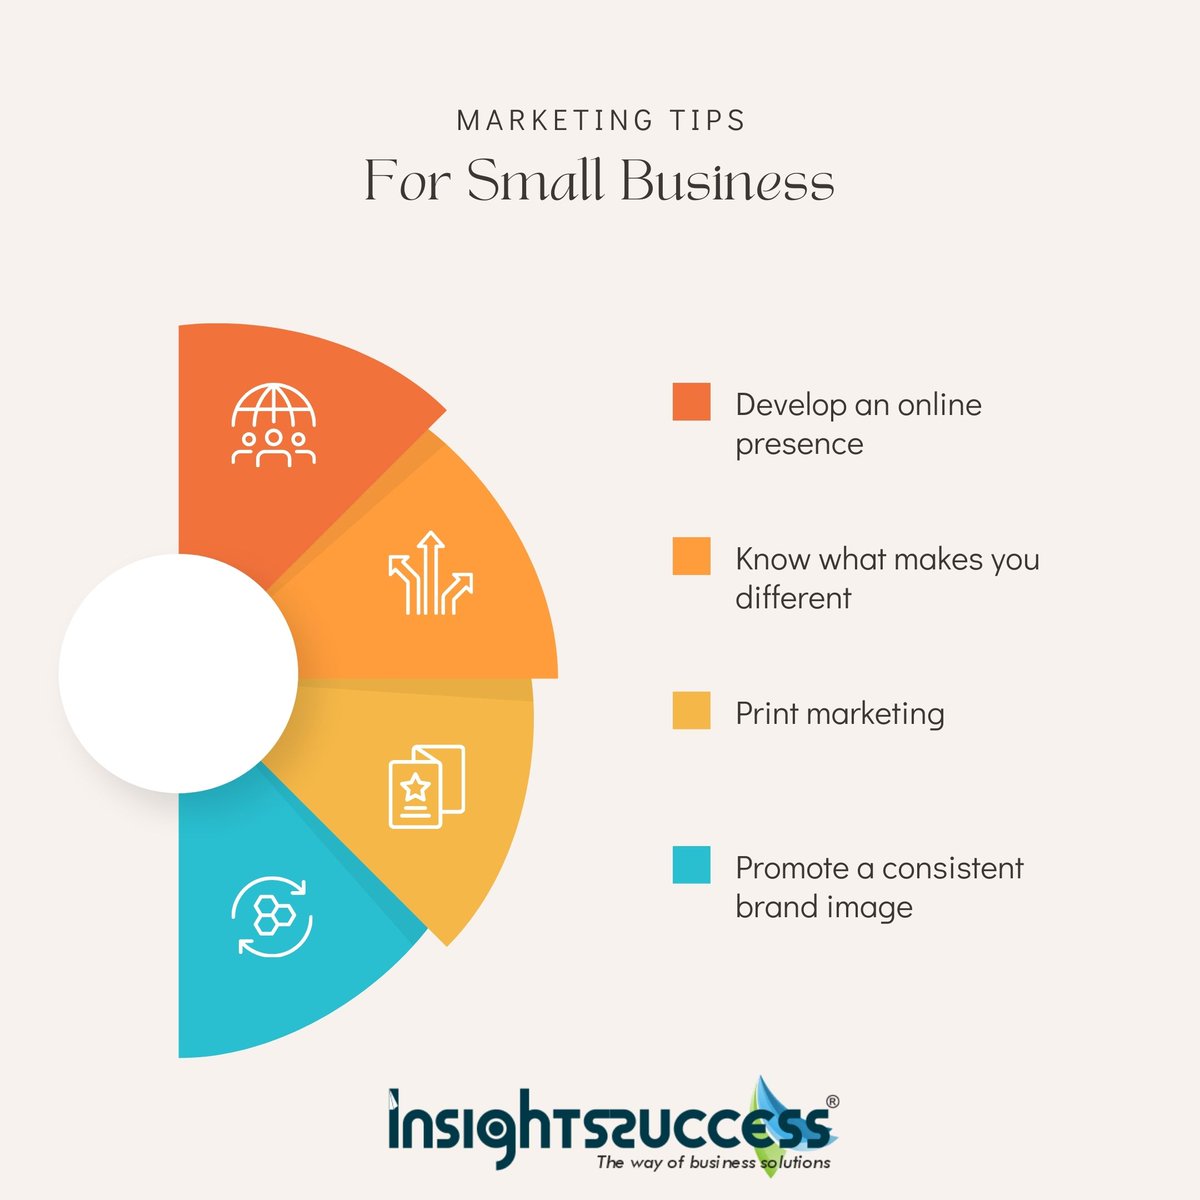 Empower your small business with these actionable tips and strategies! From marketing hacks to productivity boosts, unlock the secrets to success for your entrepreneurial journey. 💼✨

#InsightsSuccess #productivity #SmallBusinessTips #Entrepreneurship #BusinessAdvice